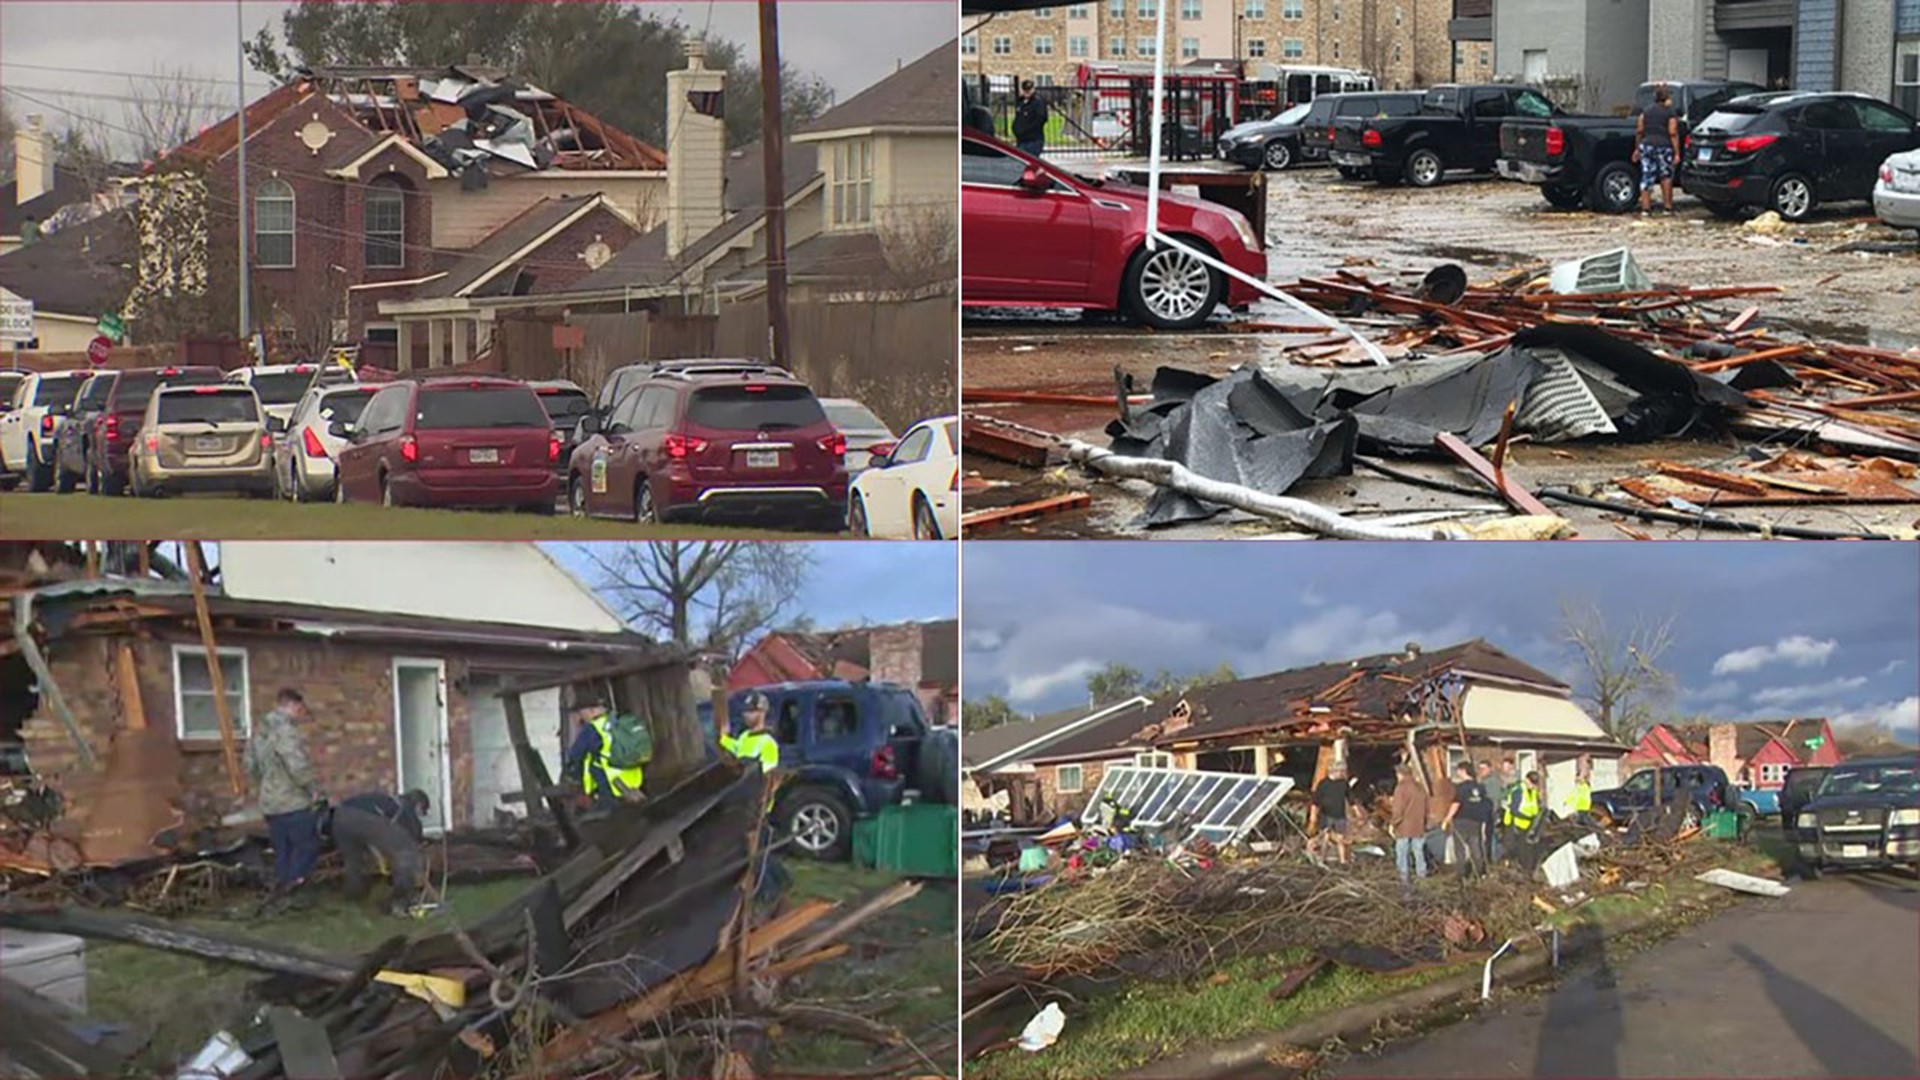 A tornado touched down in the Houston area on Tuesday causing significant damage along its path.